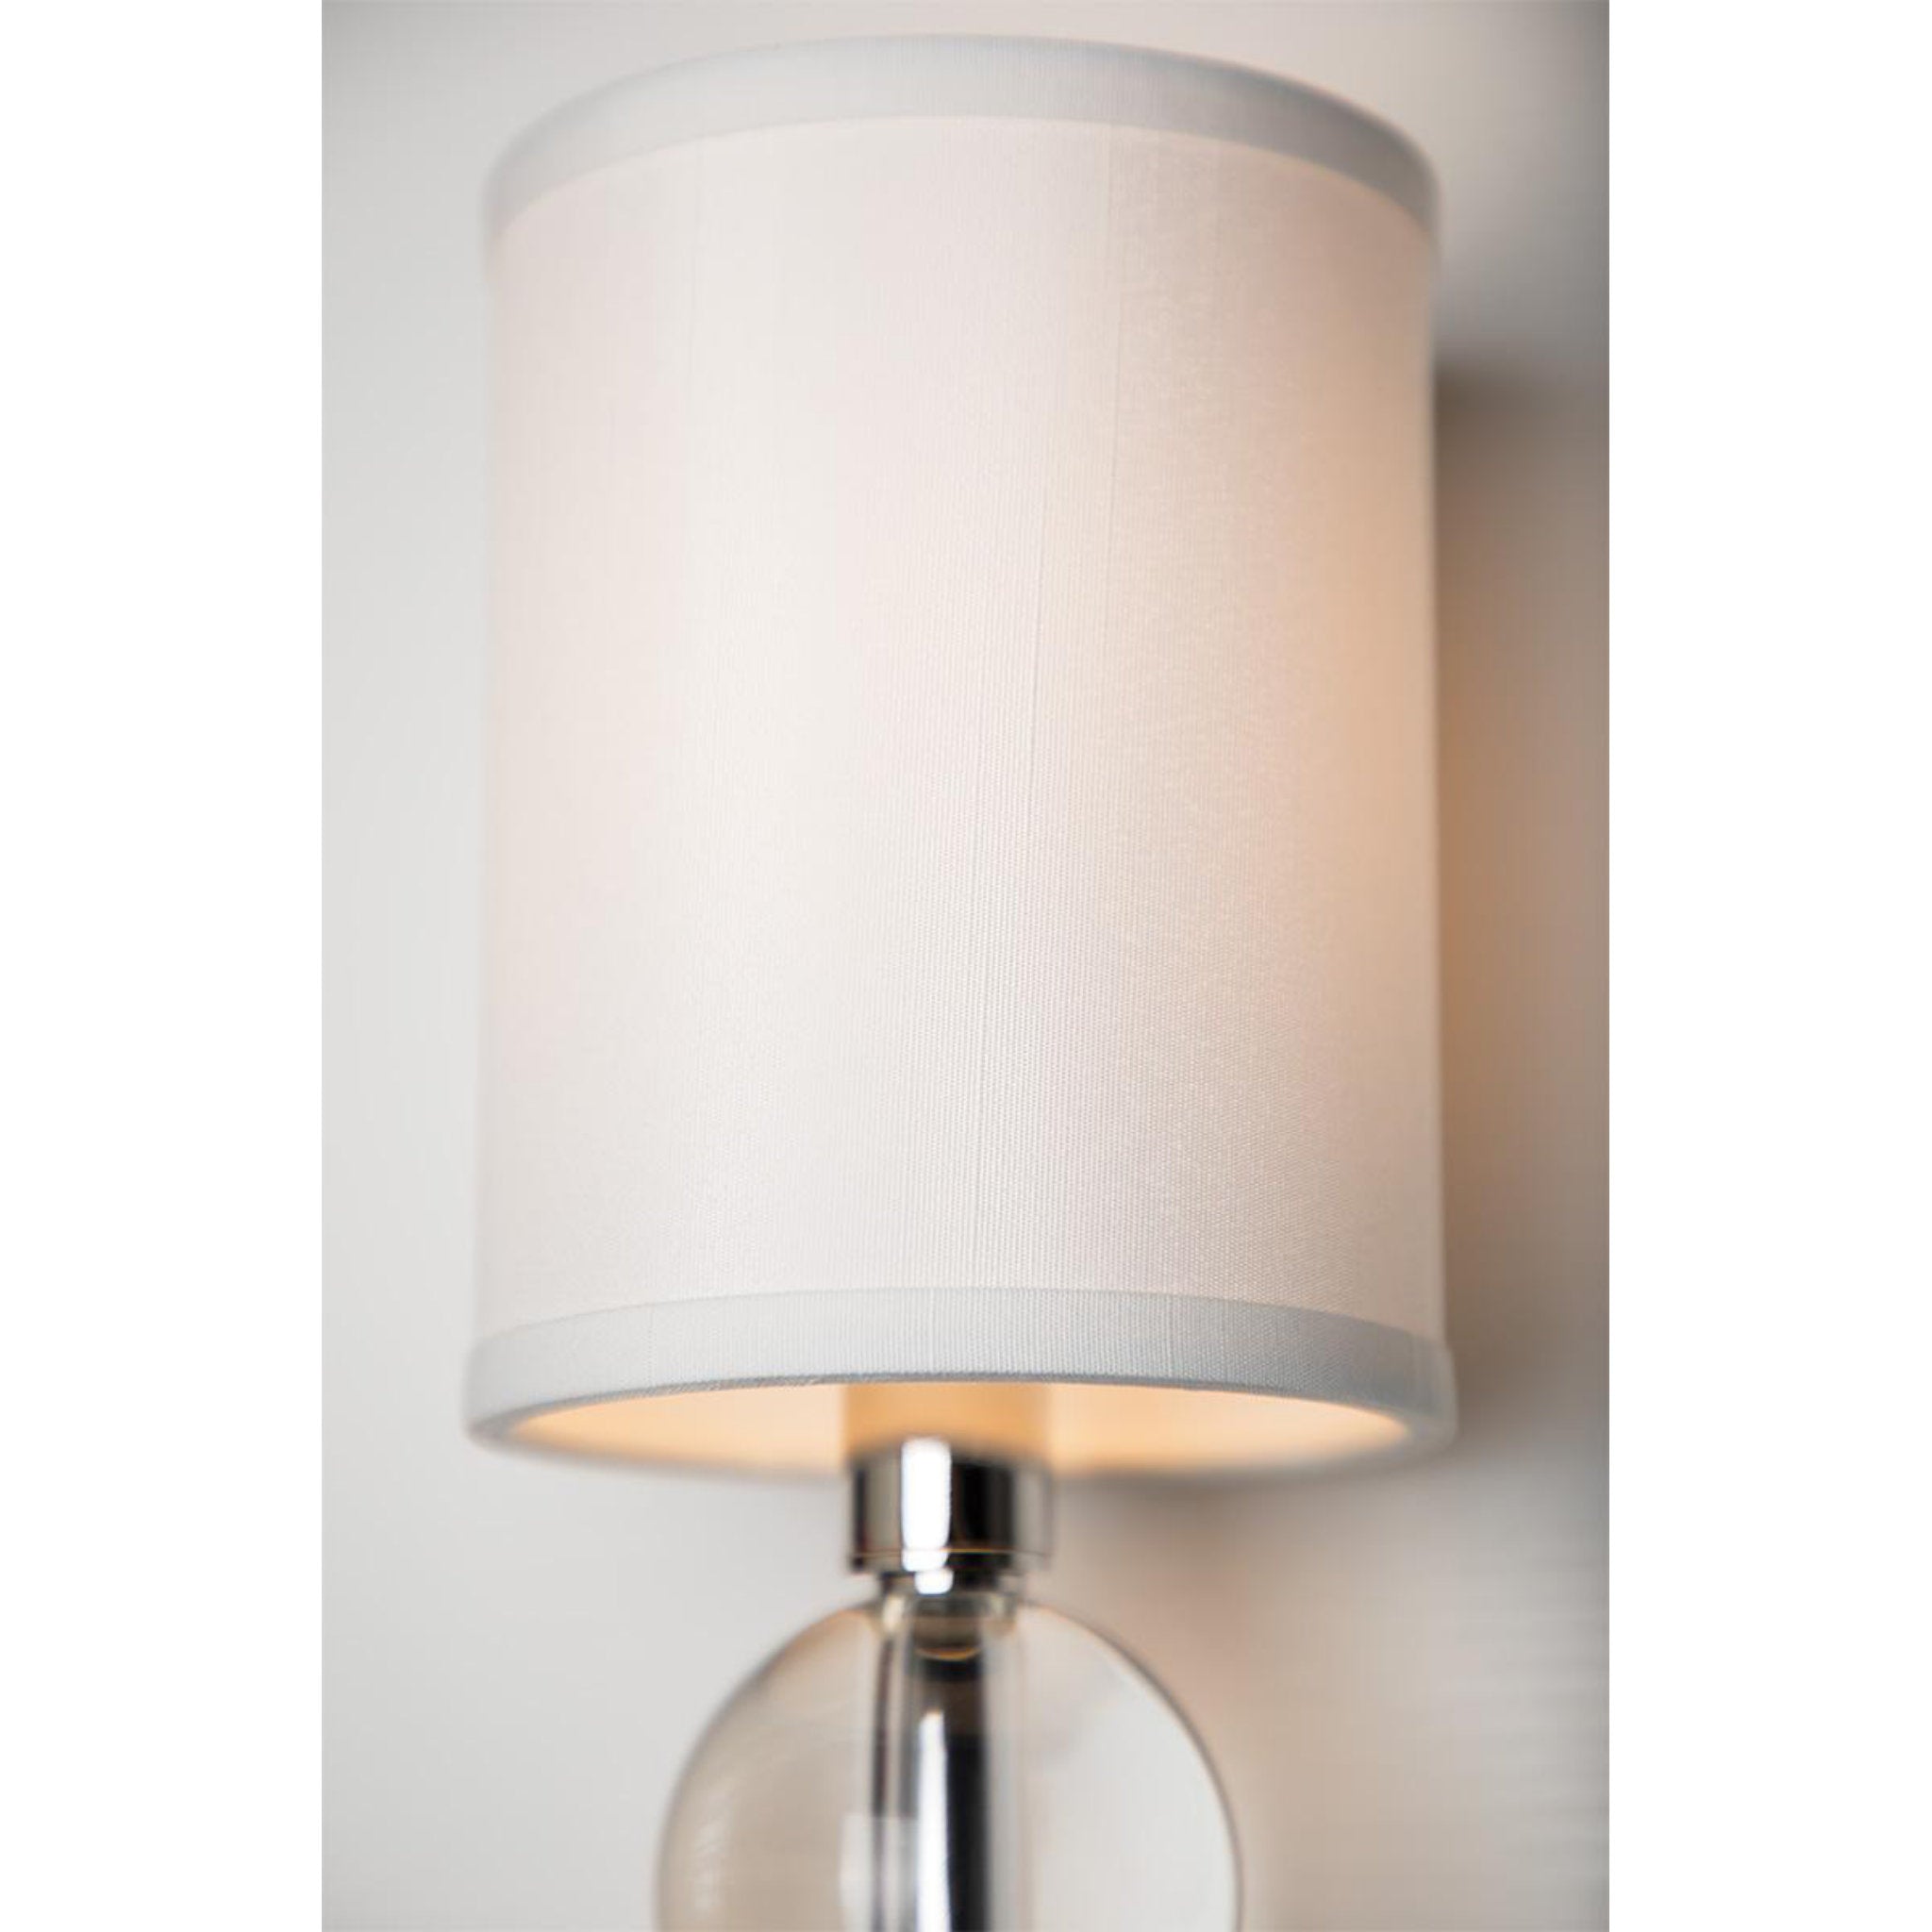 Rockland 2 Light Wall Sconce in Polished Nickel